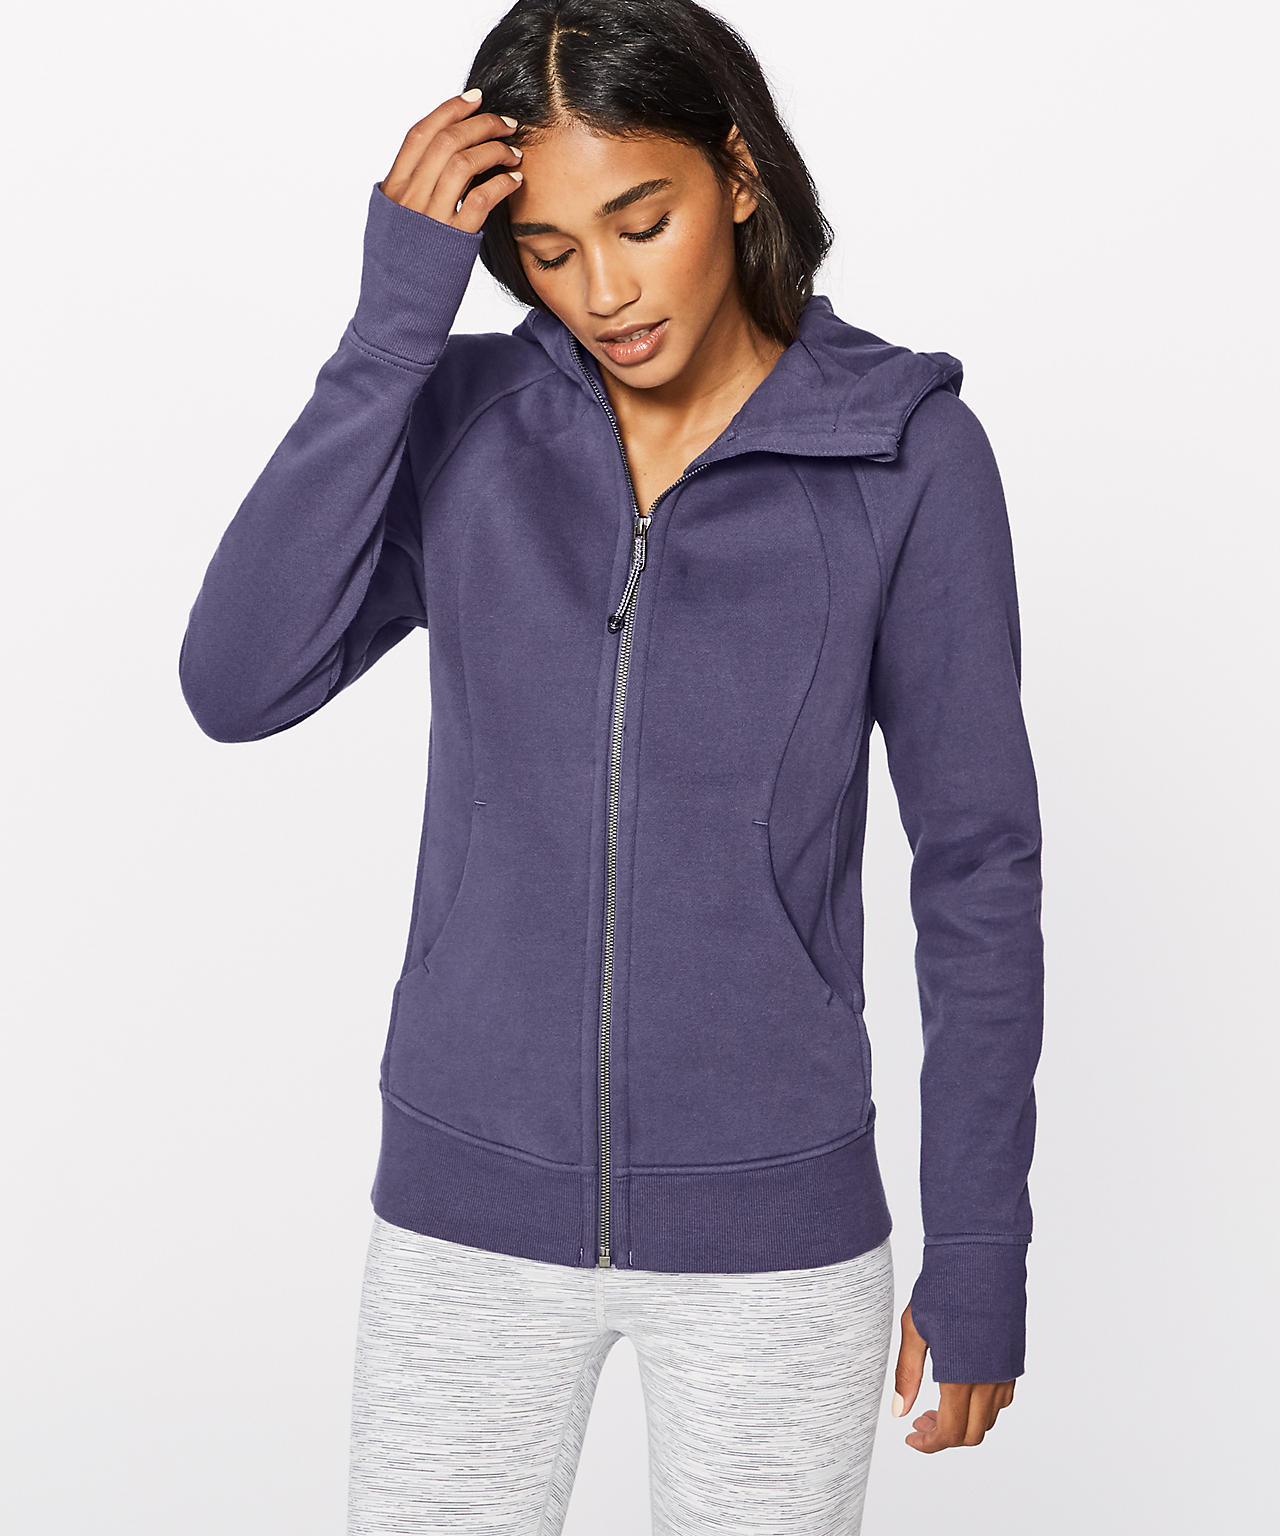 lululemon down and around jacket reviewed